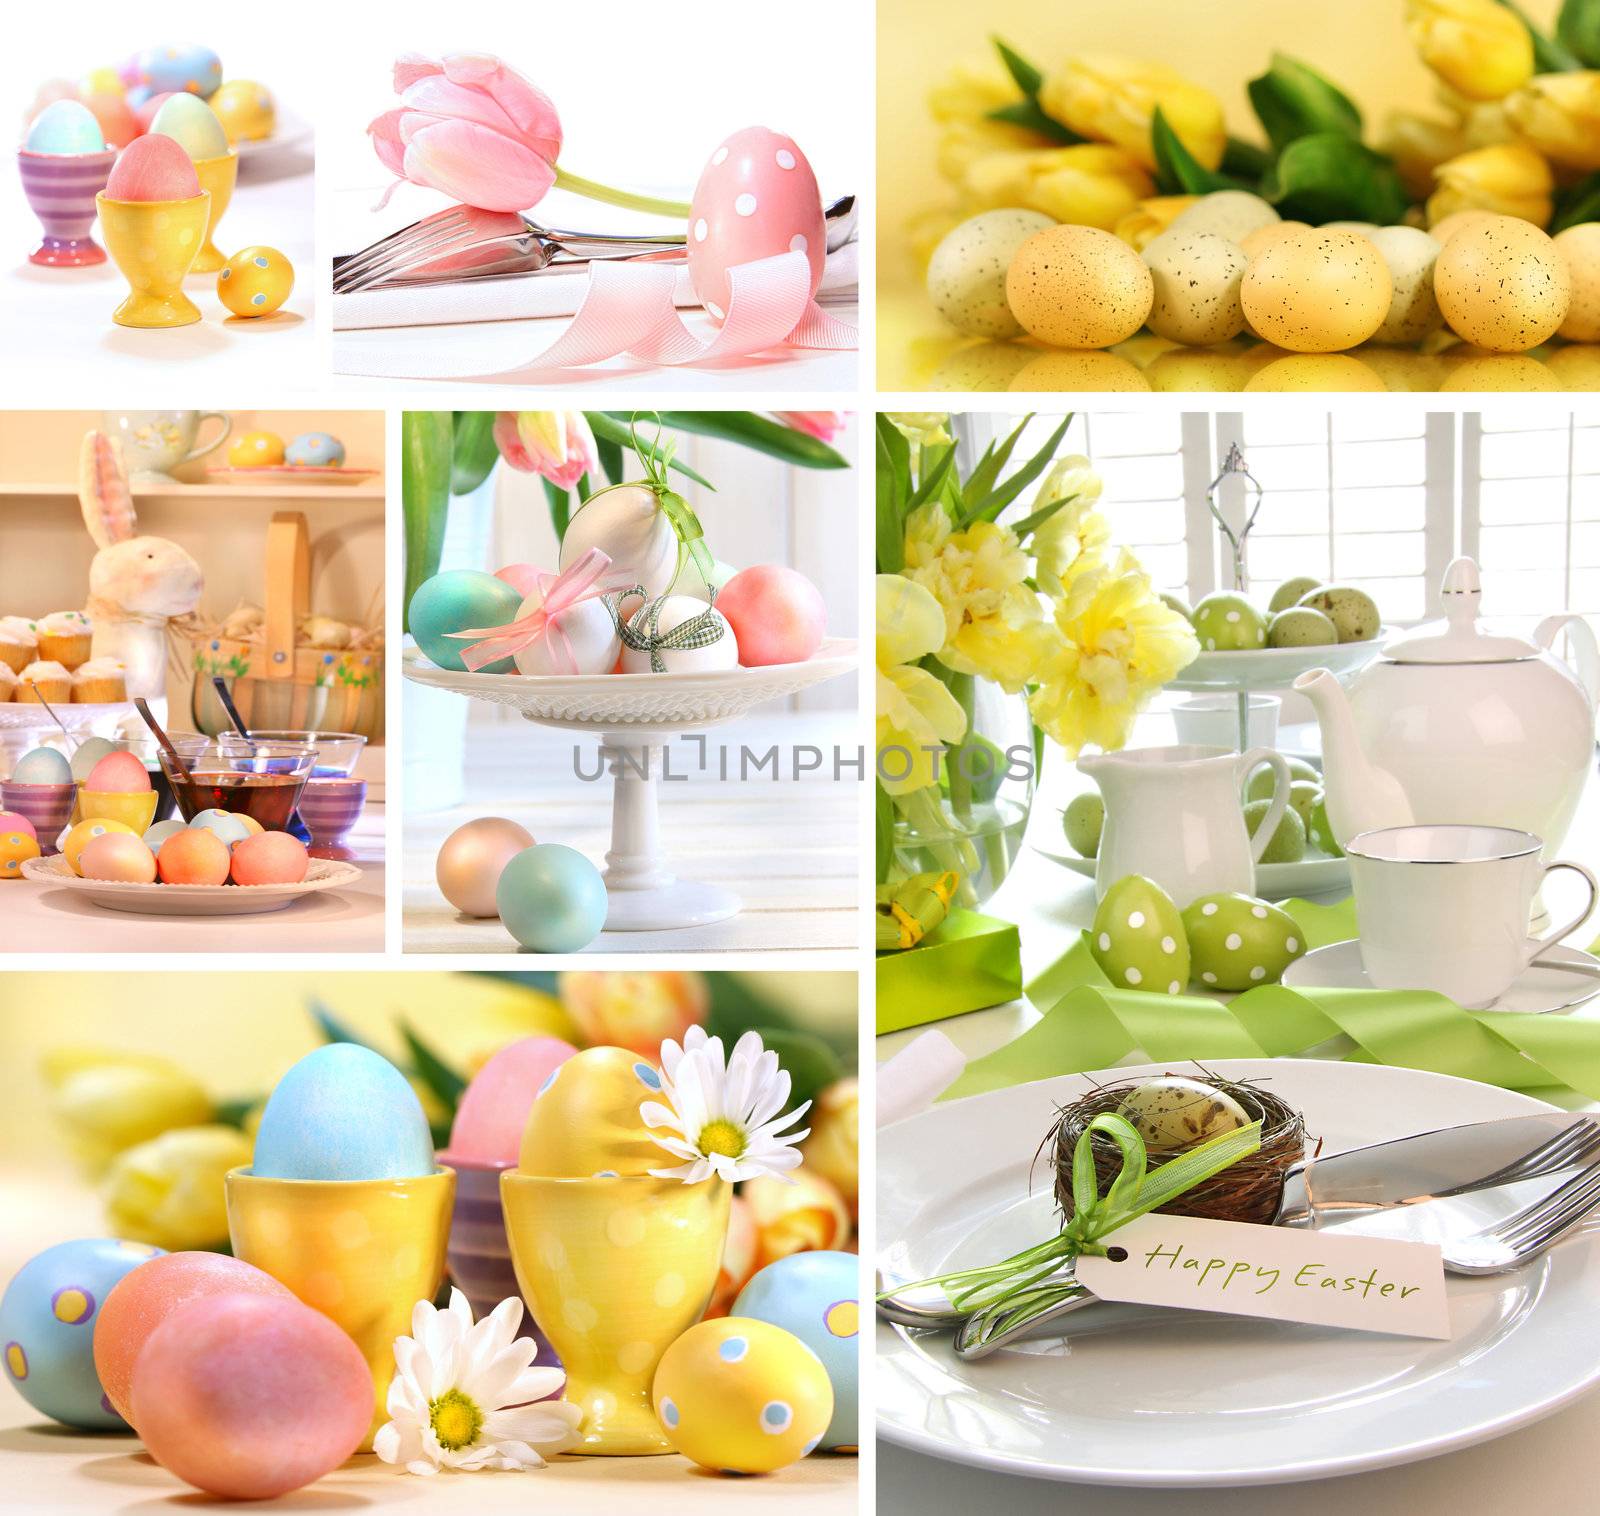 Collage of colorful easter images by Sandralise